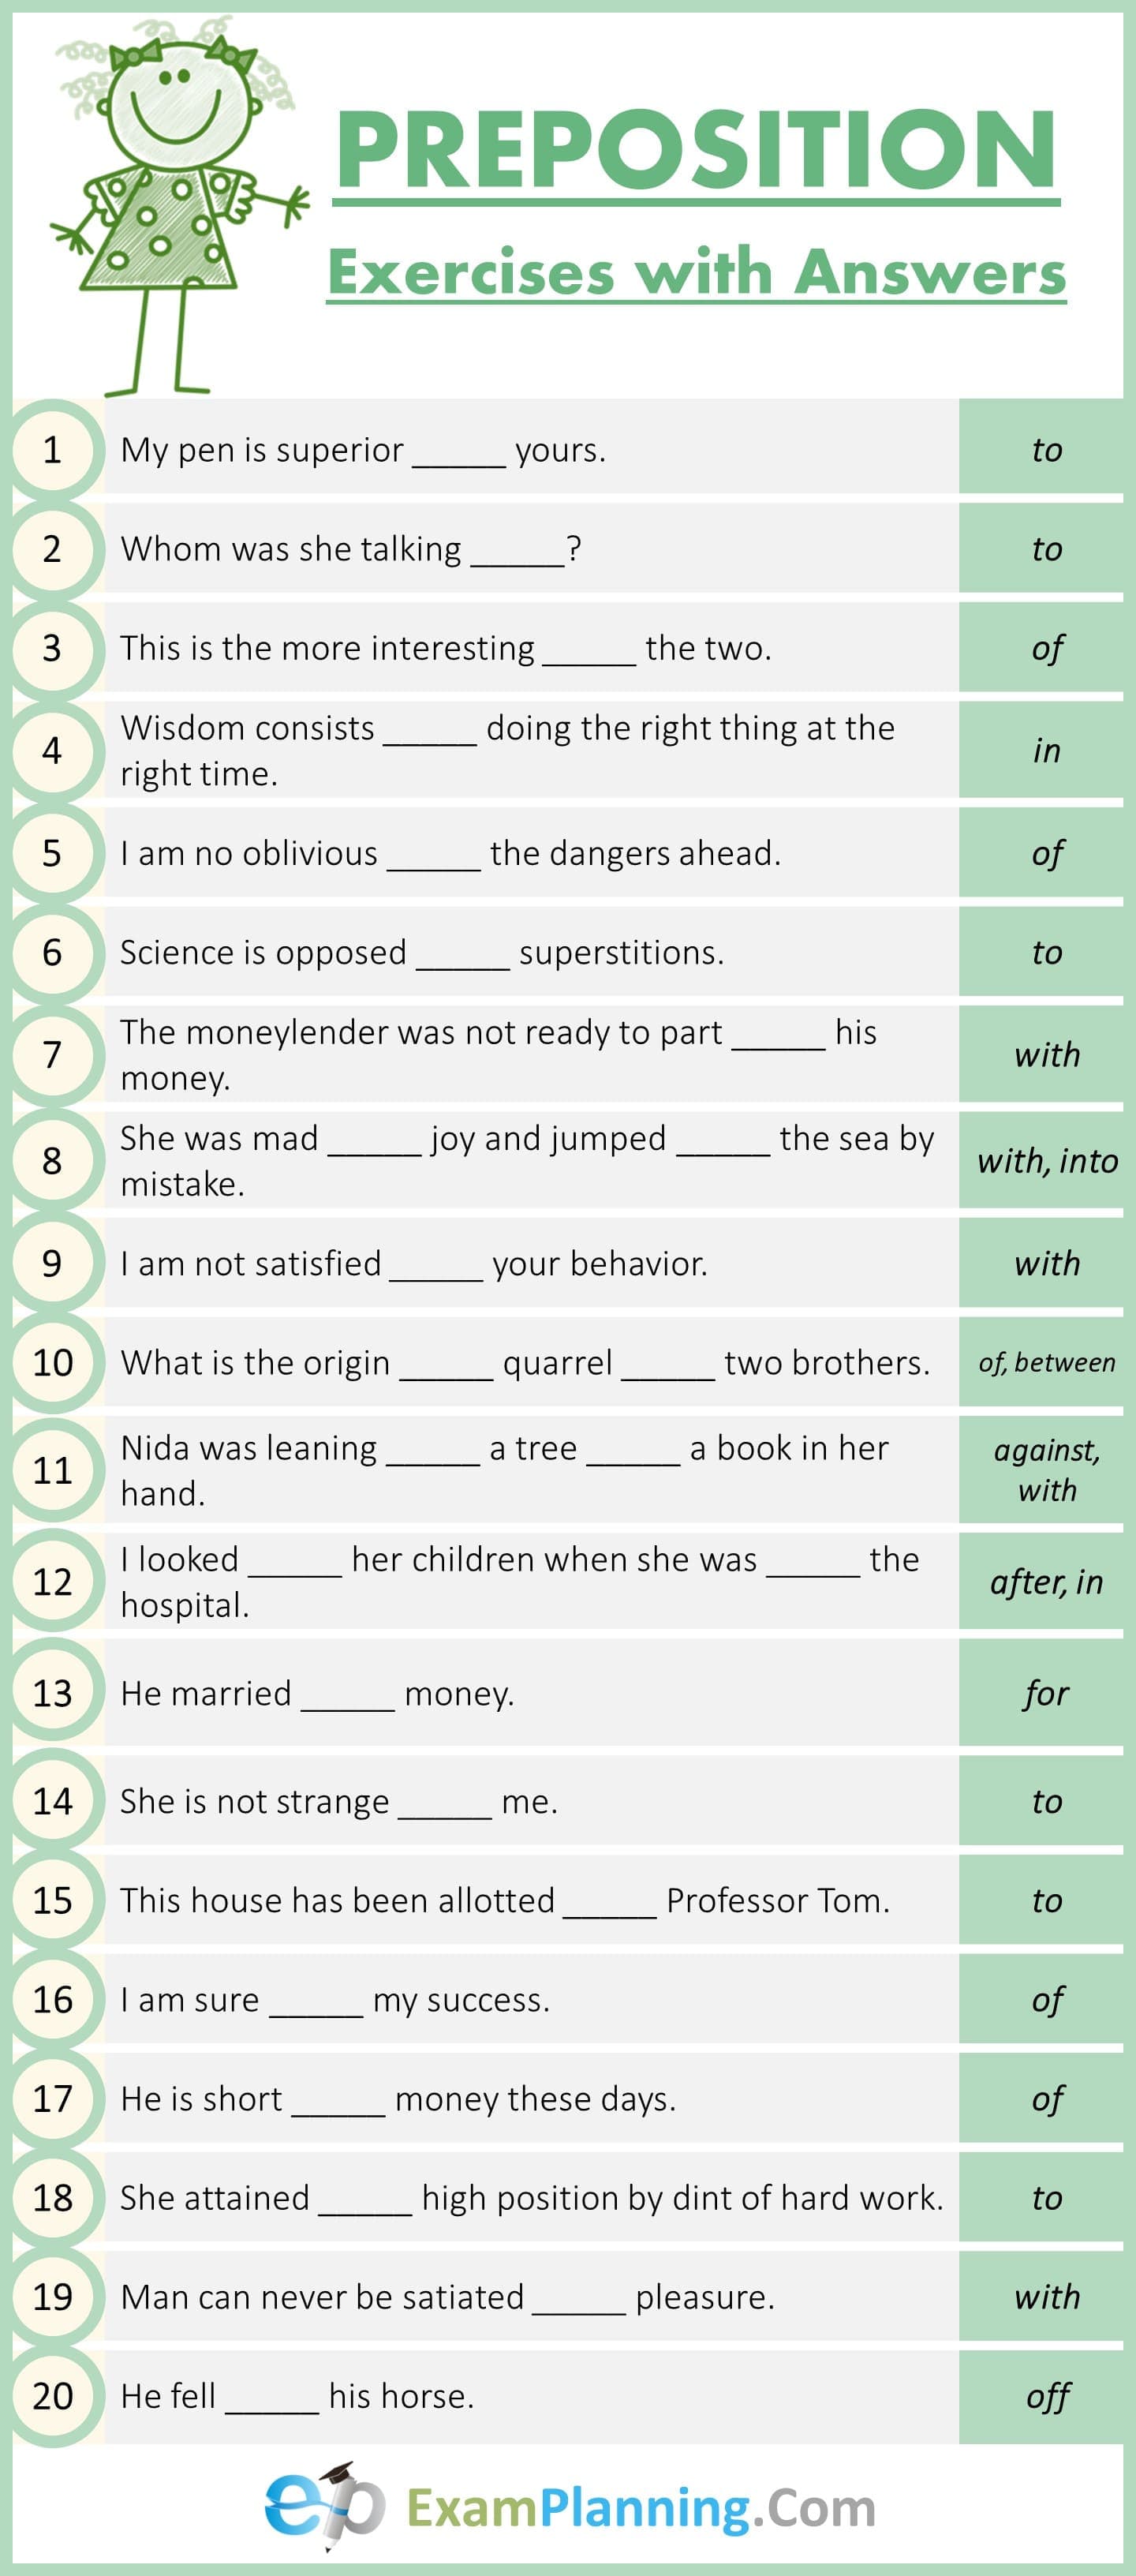 mixed-preposition-exercises-with-answers-examplanning